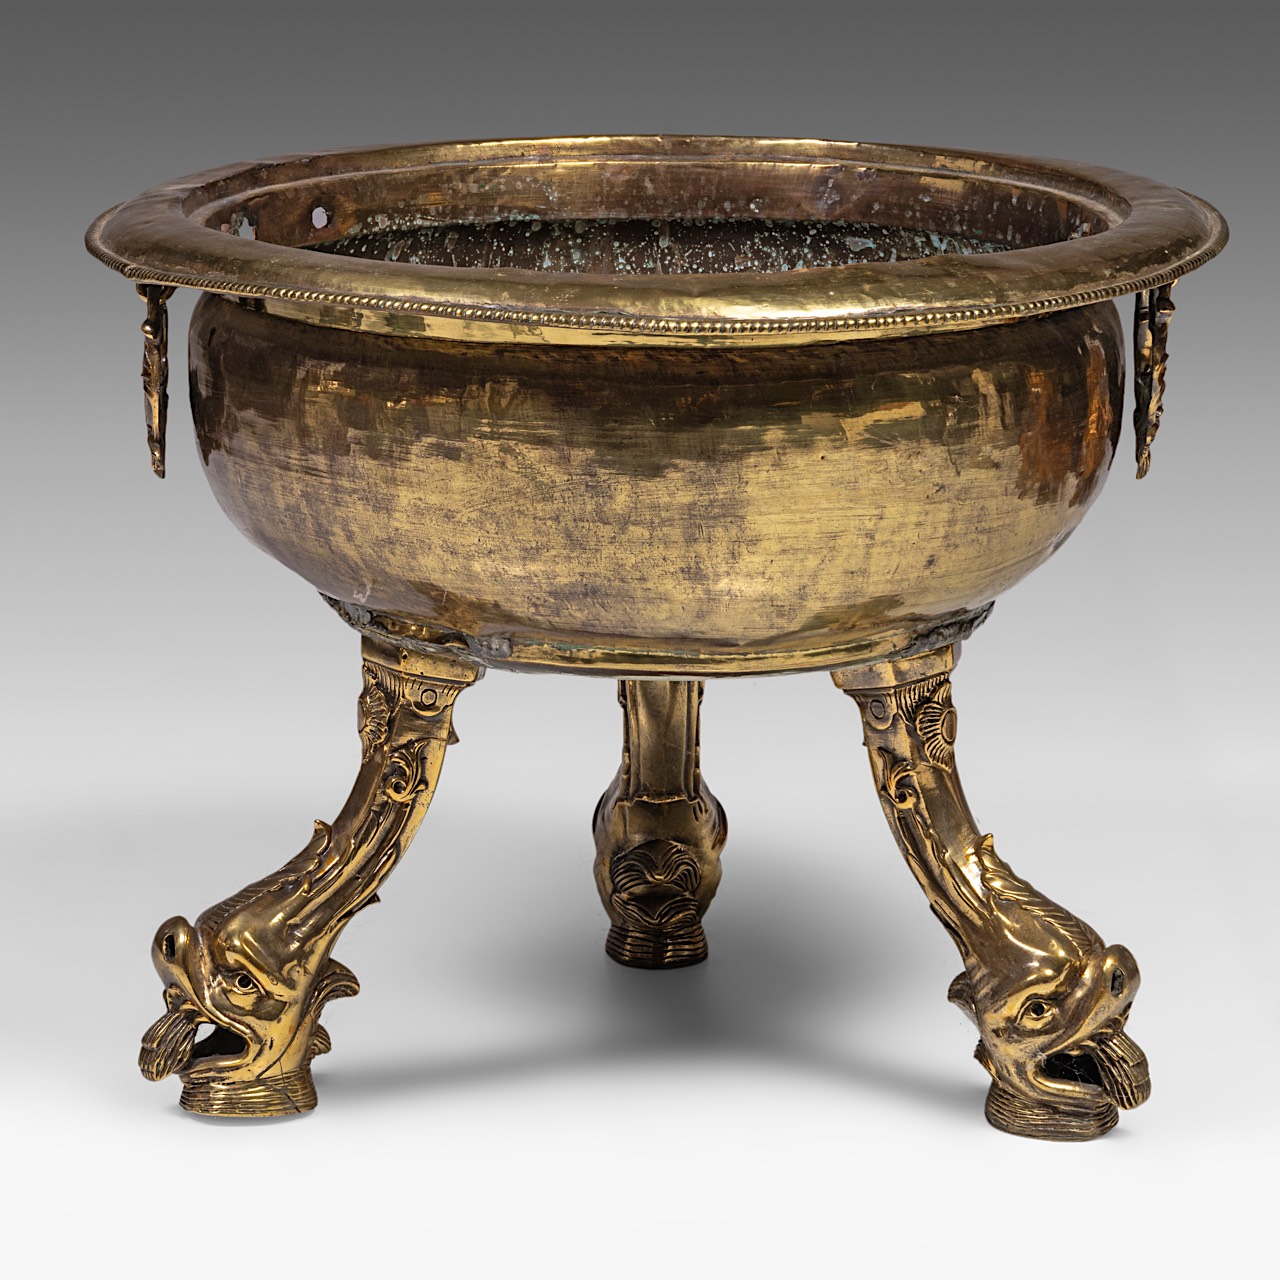 A brass wine cooler, the feet moddeled as dolphins, ca. 1700, H 47 - dia 60 cm - Image 3 of 6